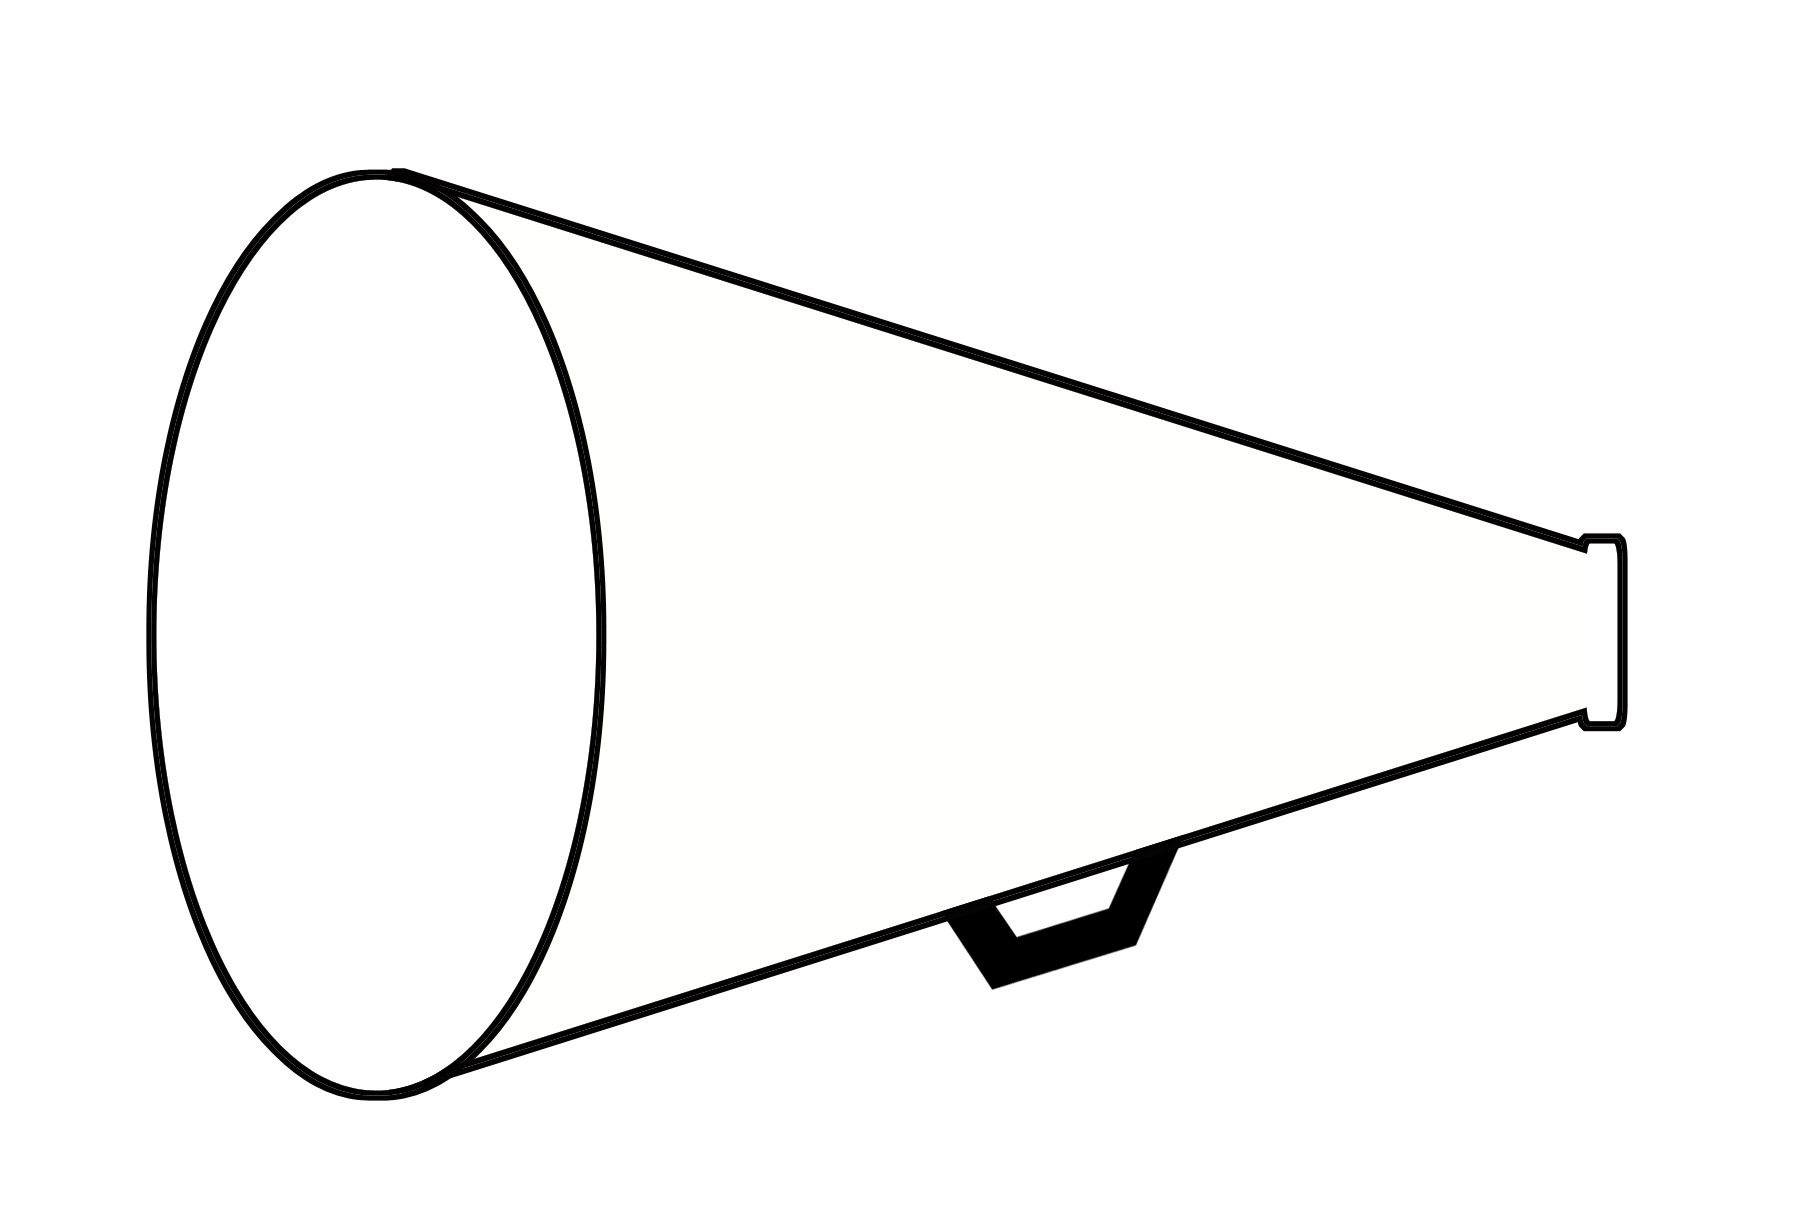 Cheerleading Megaphone And Poms Clipart Top Hd Images For Free 2 - Free Printable Megaphone Template